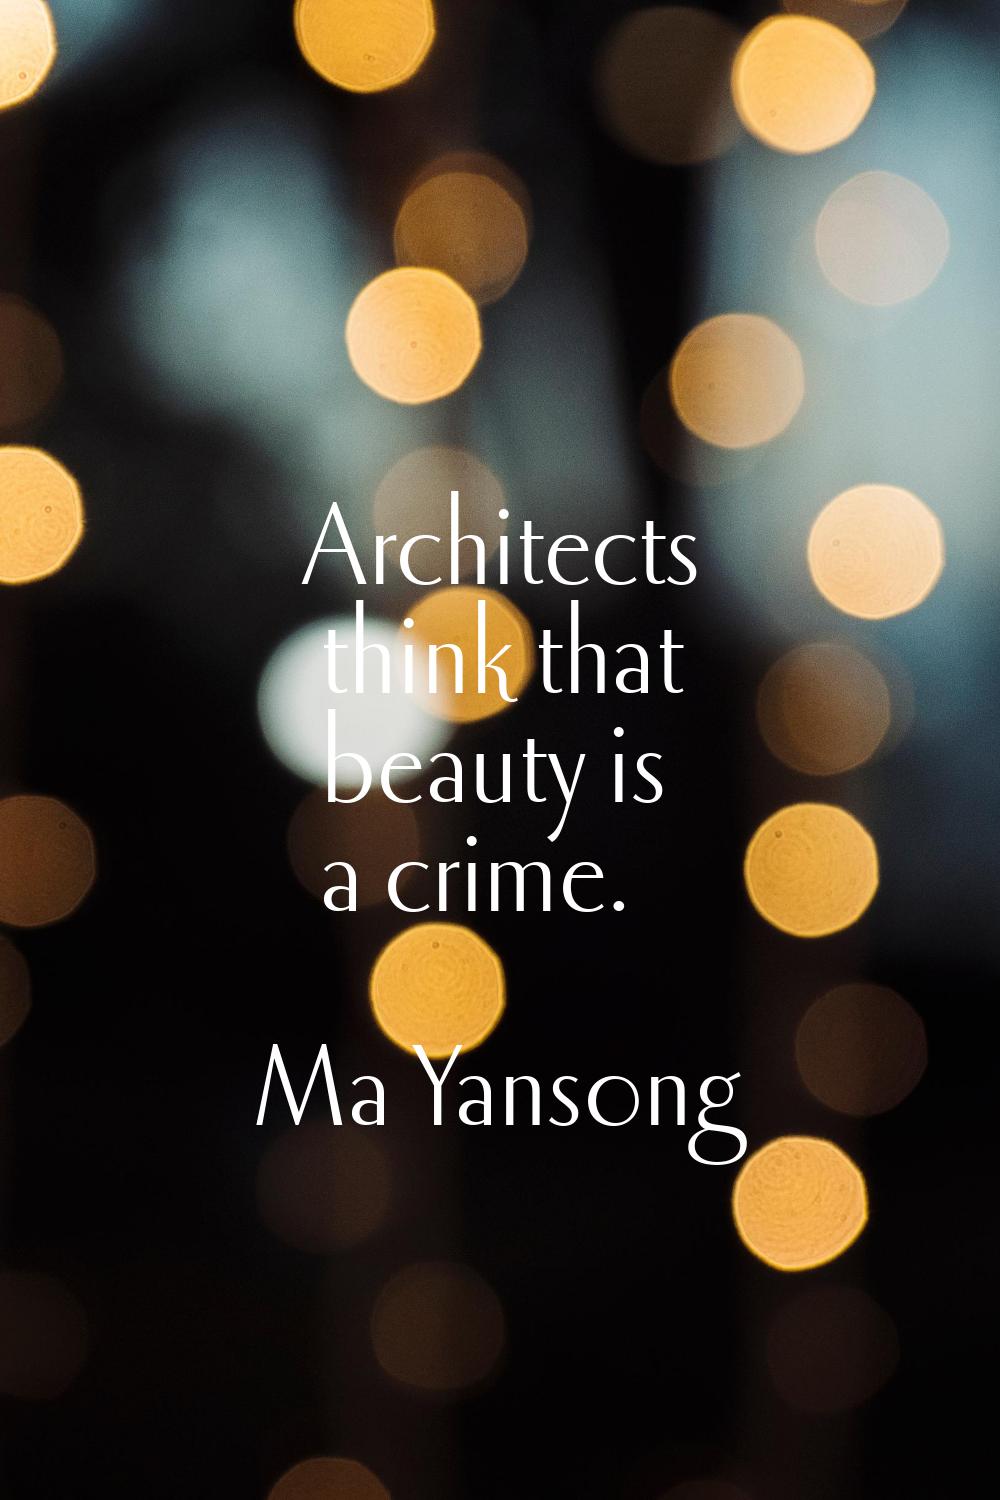 Architects think that beauty is a crime.